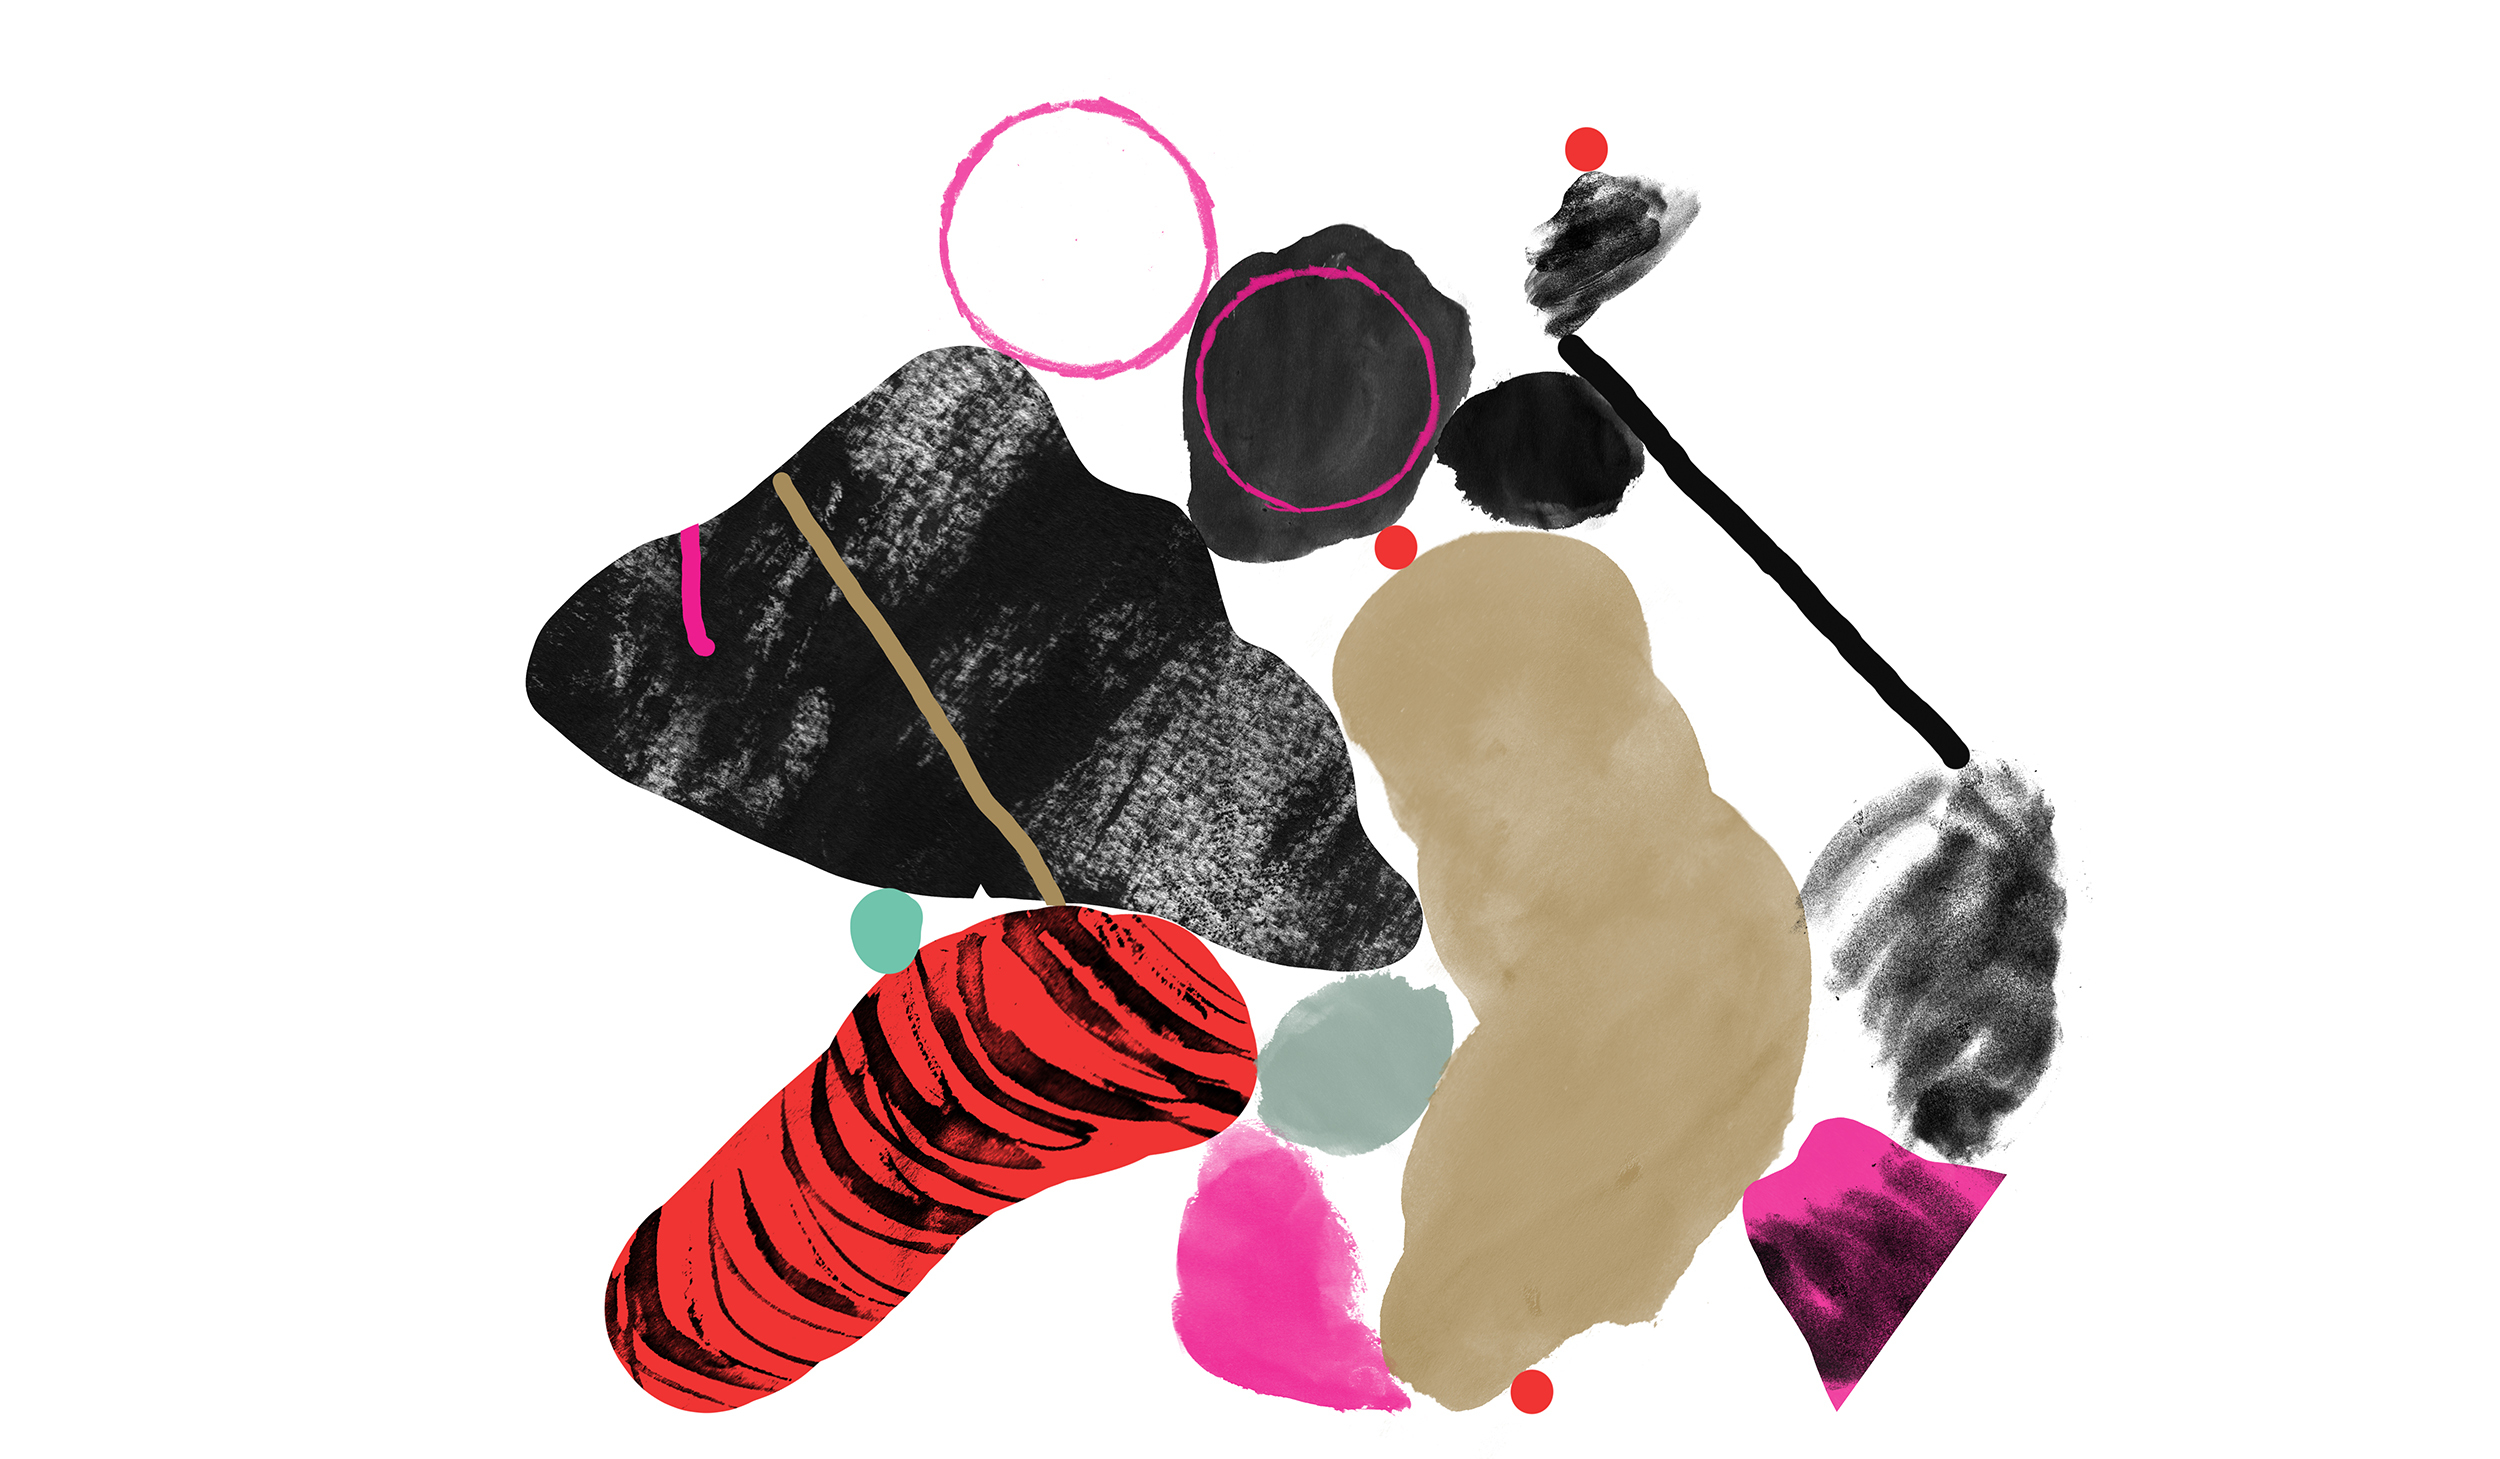 Abstract illustration of round and wobbly shapes in beige, black, pink, red and grey. They are lumped together.